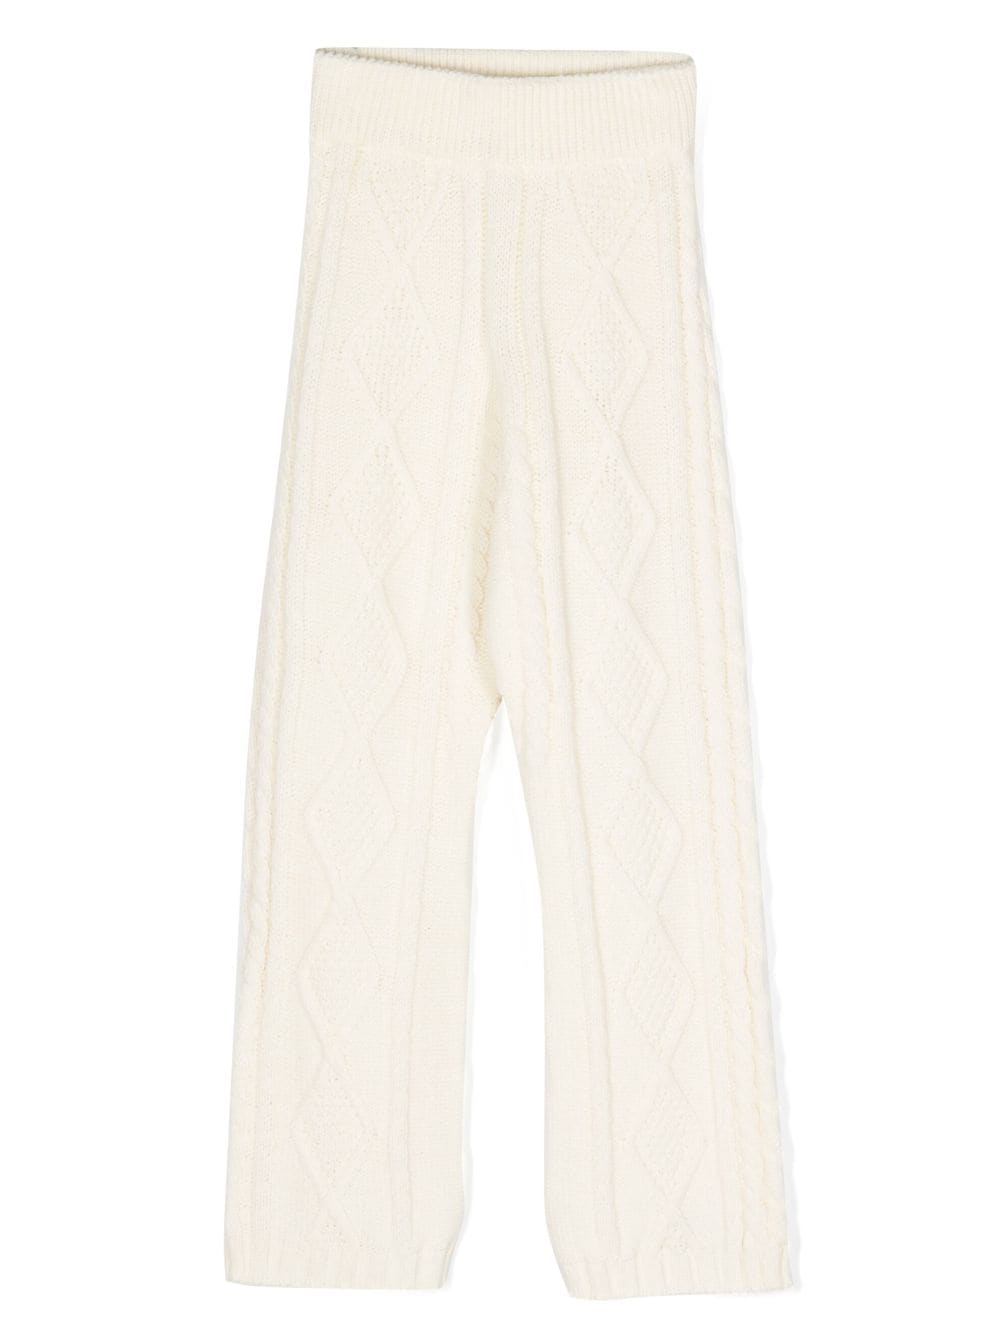 Msgm kids knitted trousers